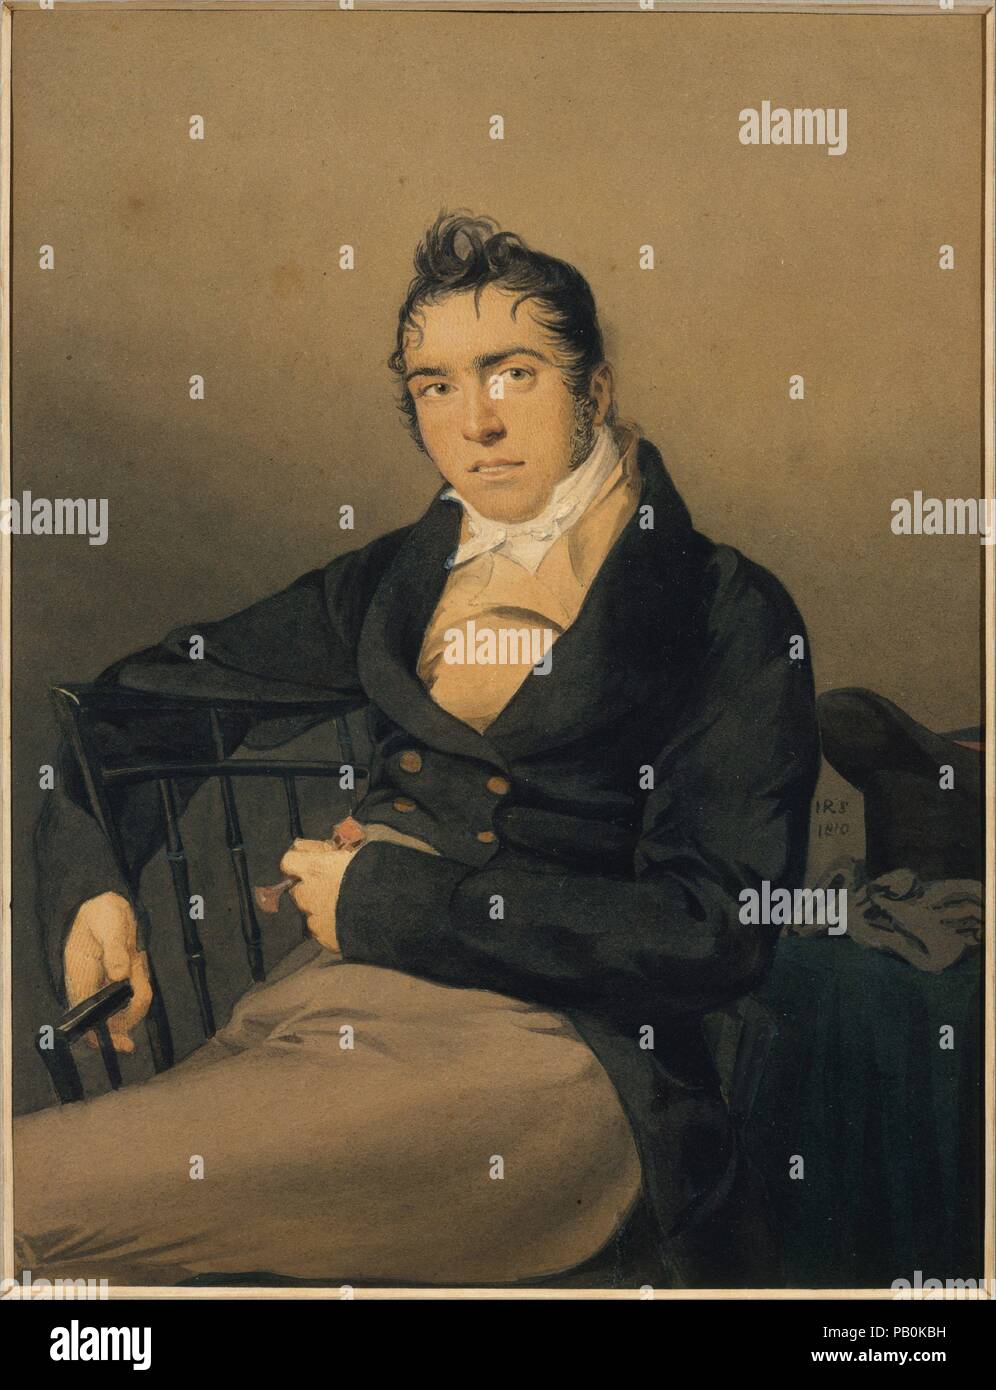 Allan Melville. Artist: John Rubens Smith (American, London 1775-1849 New York). Dimensions: 8 7/8 x 6 3/4 in. (22.5 x 17.1 cm). Date: 1810.  In his novel 'Pierre, or The Ambiguities' (1852), Herman Melville fictionalized this portrait of his father, describing the subject as the father of Pierre, the hero of the tale. The portrait so fascinated the younger Melville that an entire chapter, and much of the novel's theme, turns upon the mystery of the sitter's character, concealed by his youth, informality, and apparent candor. The portraitist Smith never exceeded his mastery here of exacting te Stock Photo